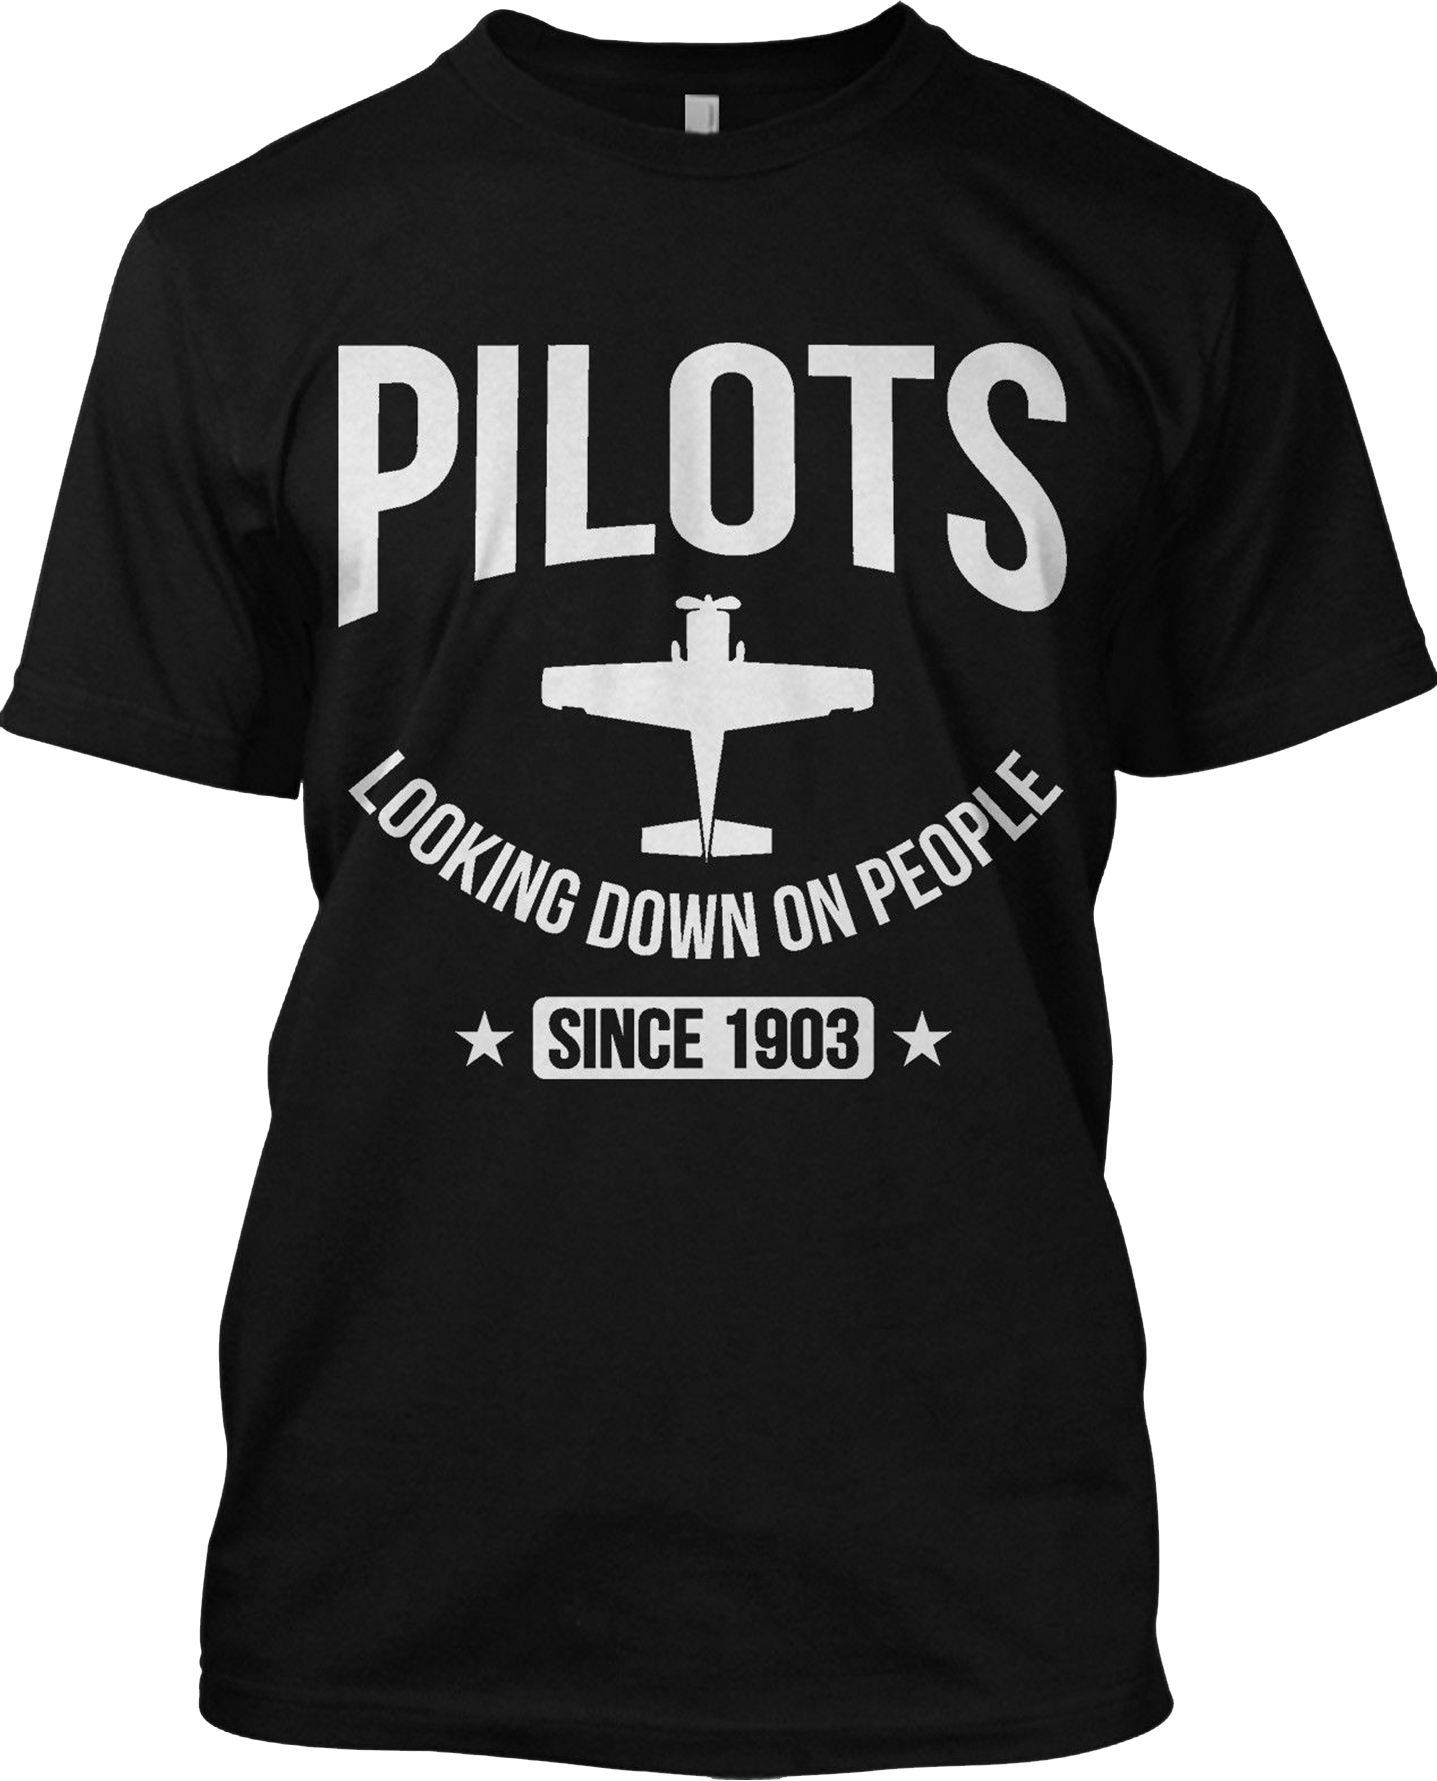 Pilots Looking Down On People Since 1903 Funny T Shirt Graphic Planes Tee